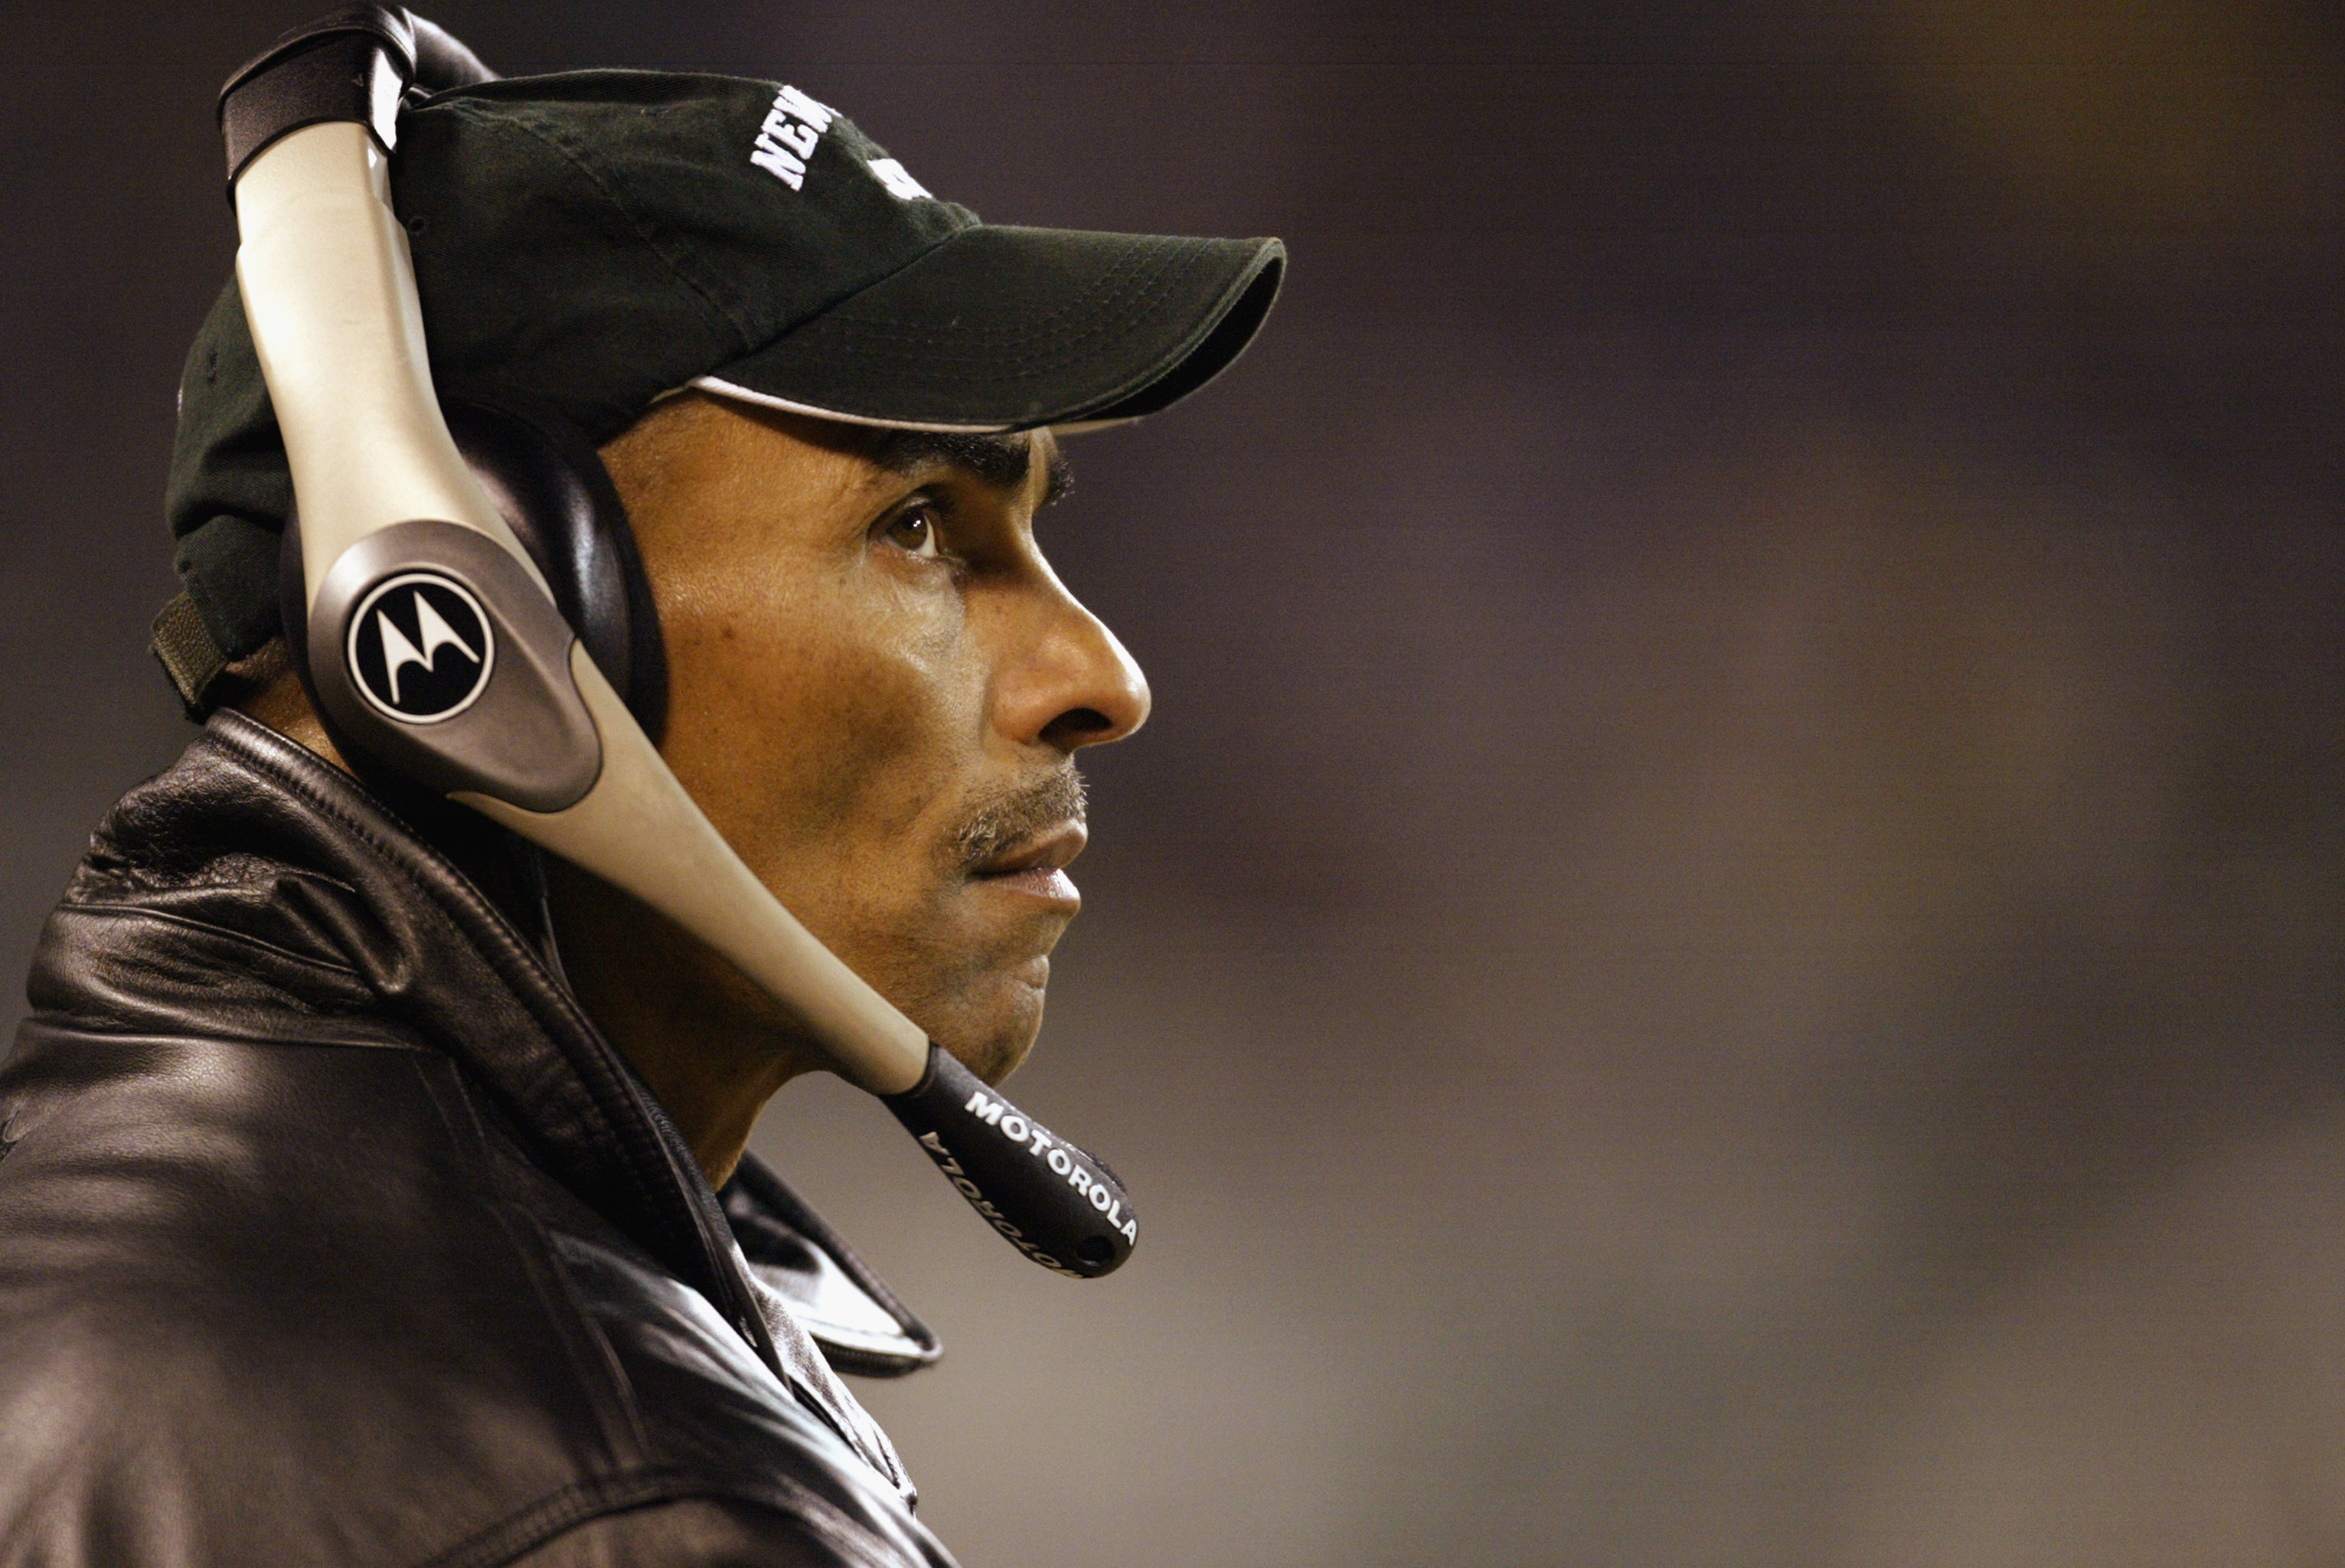 EAST RUTHERFORD, NJ - DECEMBER 8:  Herman Edwards head coach of the New York Jets looks on during the game against the Denver Broncos on December 8, 2002 at Giants Stadium in East Rutherford, New Jersey.  (Photo by Al Bello/Getty Images)